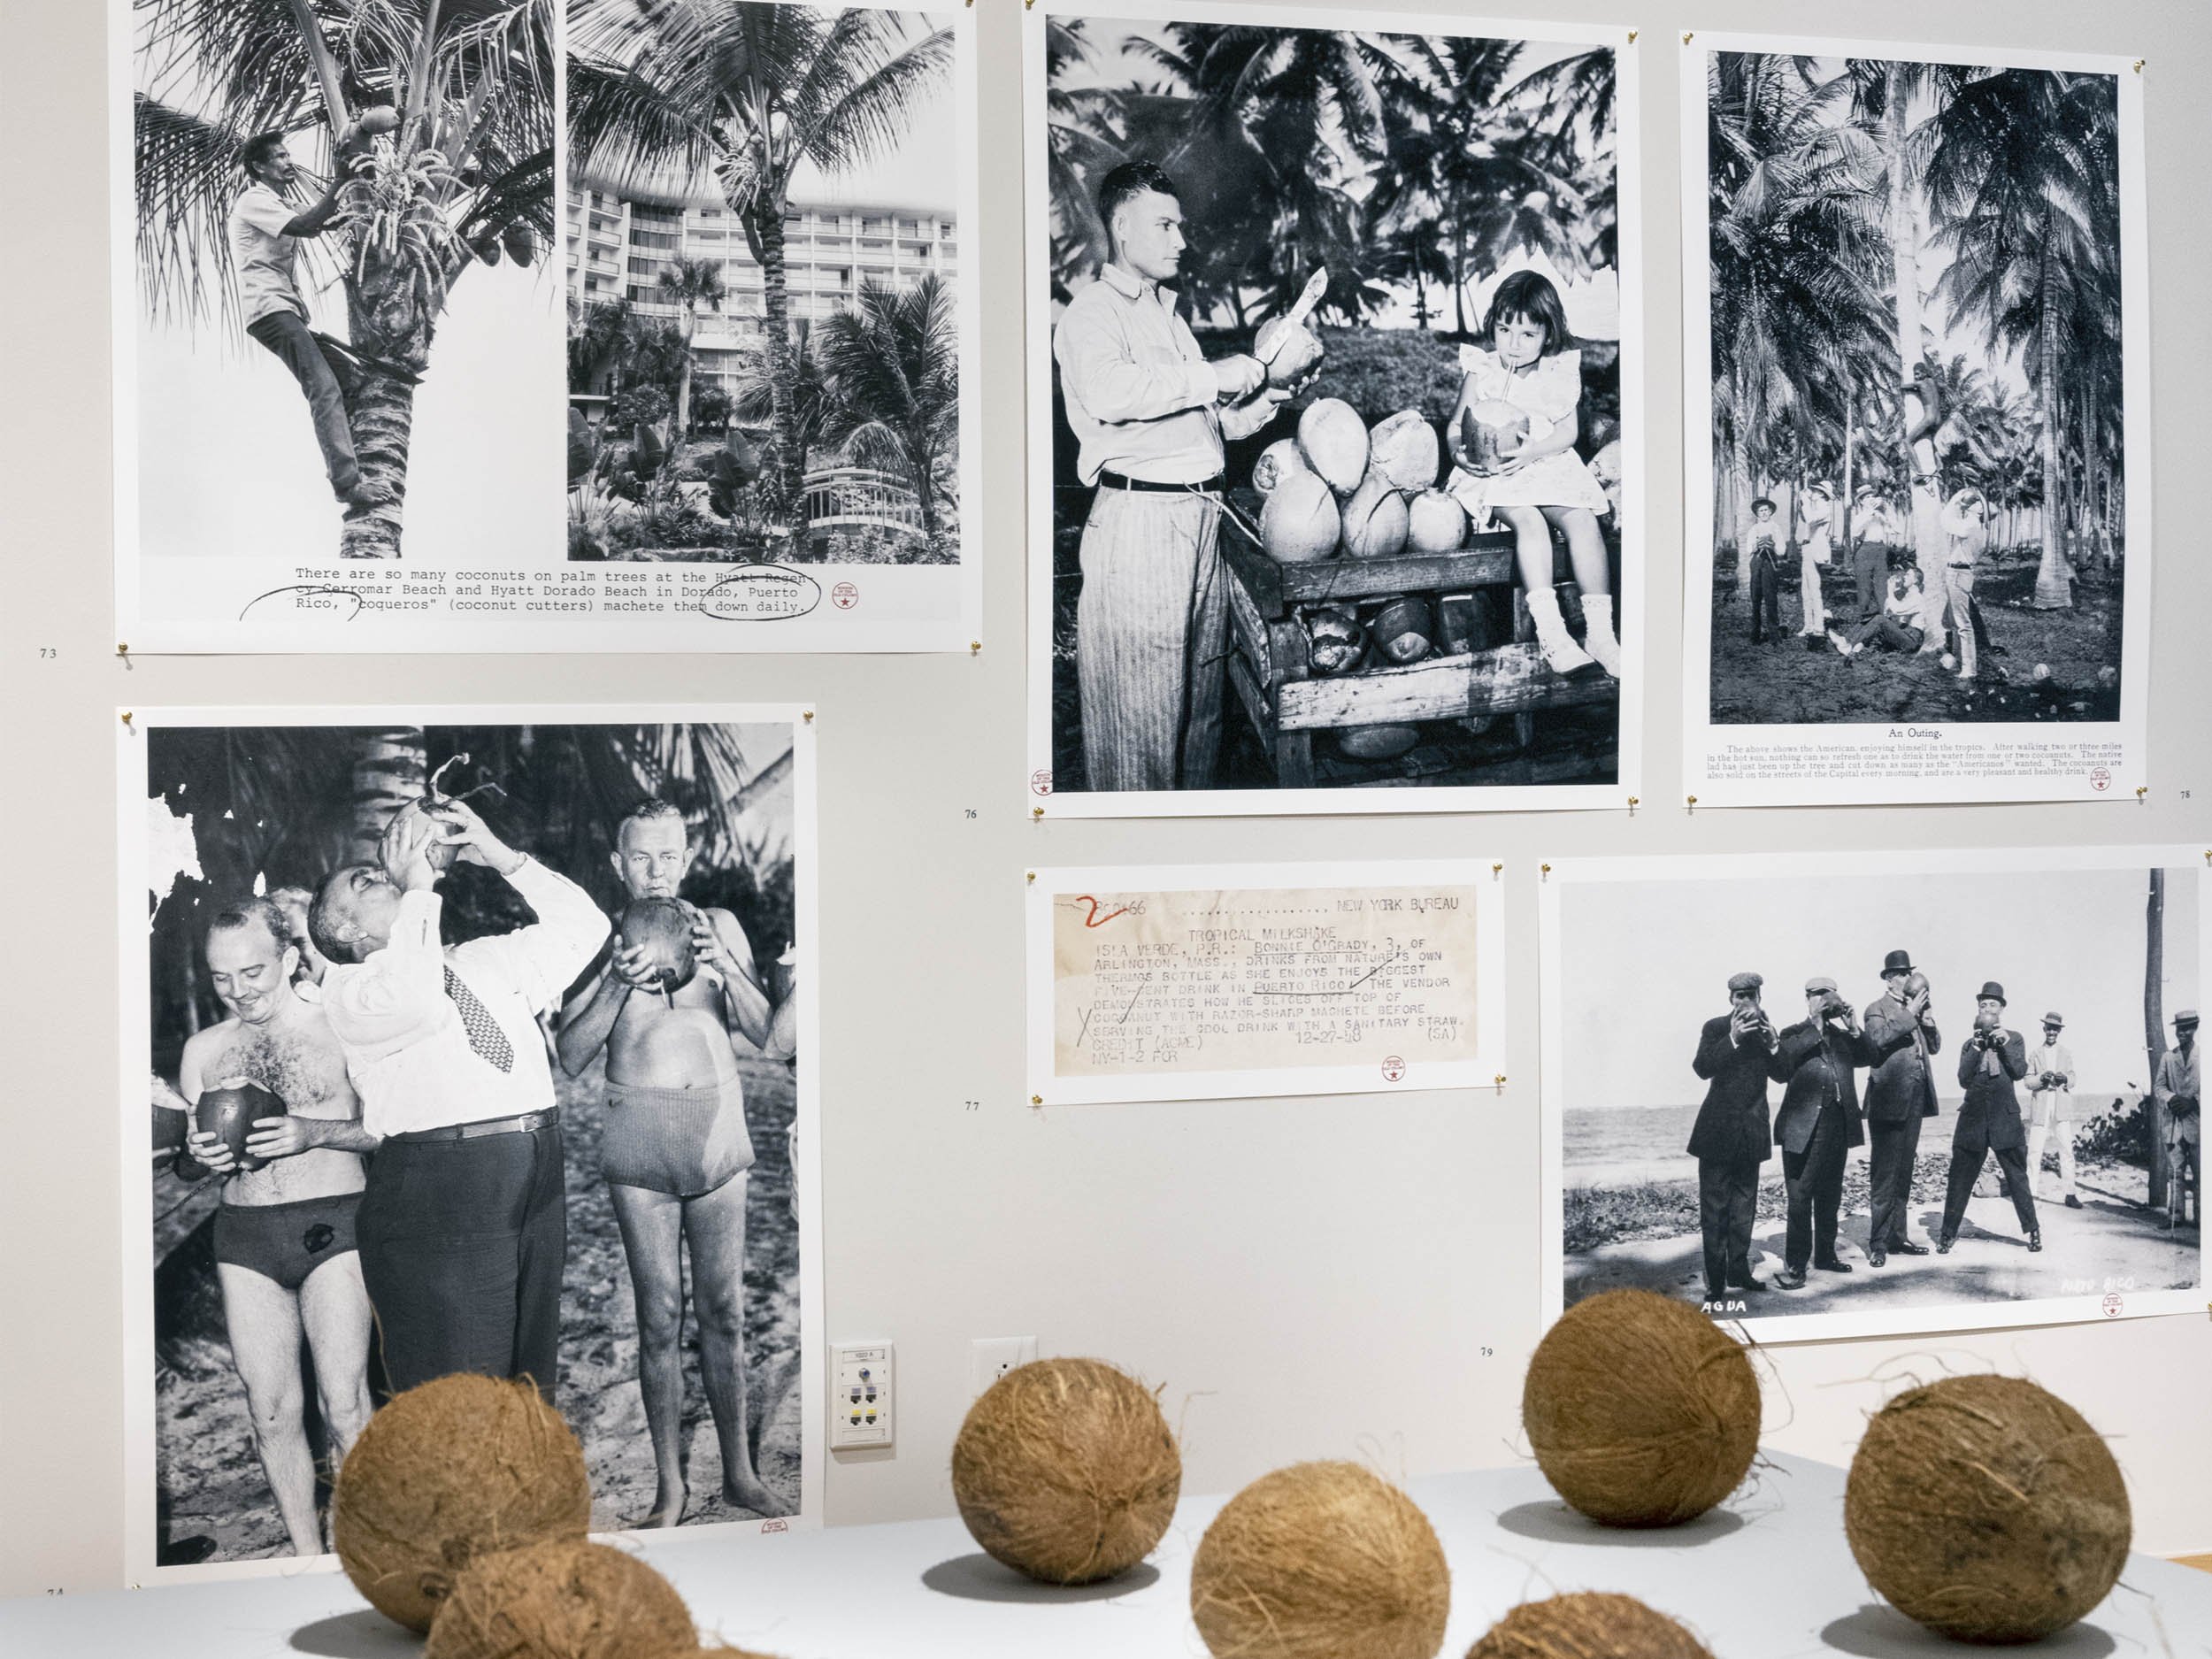  Installation view (cropped).  Platos y Cocos  (detail in foreground) and coconut-related photographs and captions. Clockwise from 1946, after 1971, 1948, circa 1898, and early 20th-century   |   2019-2021.  The Museum of the Old Colony , Duke Hall G